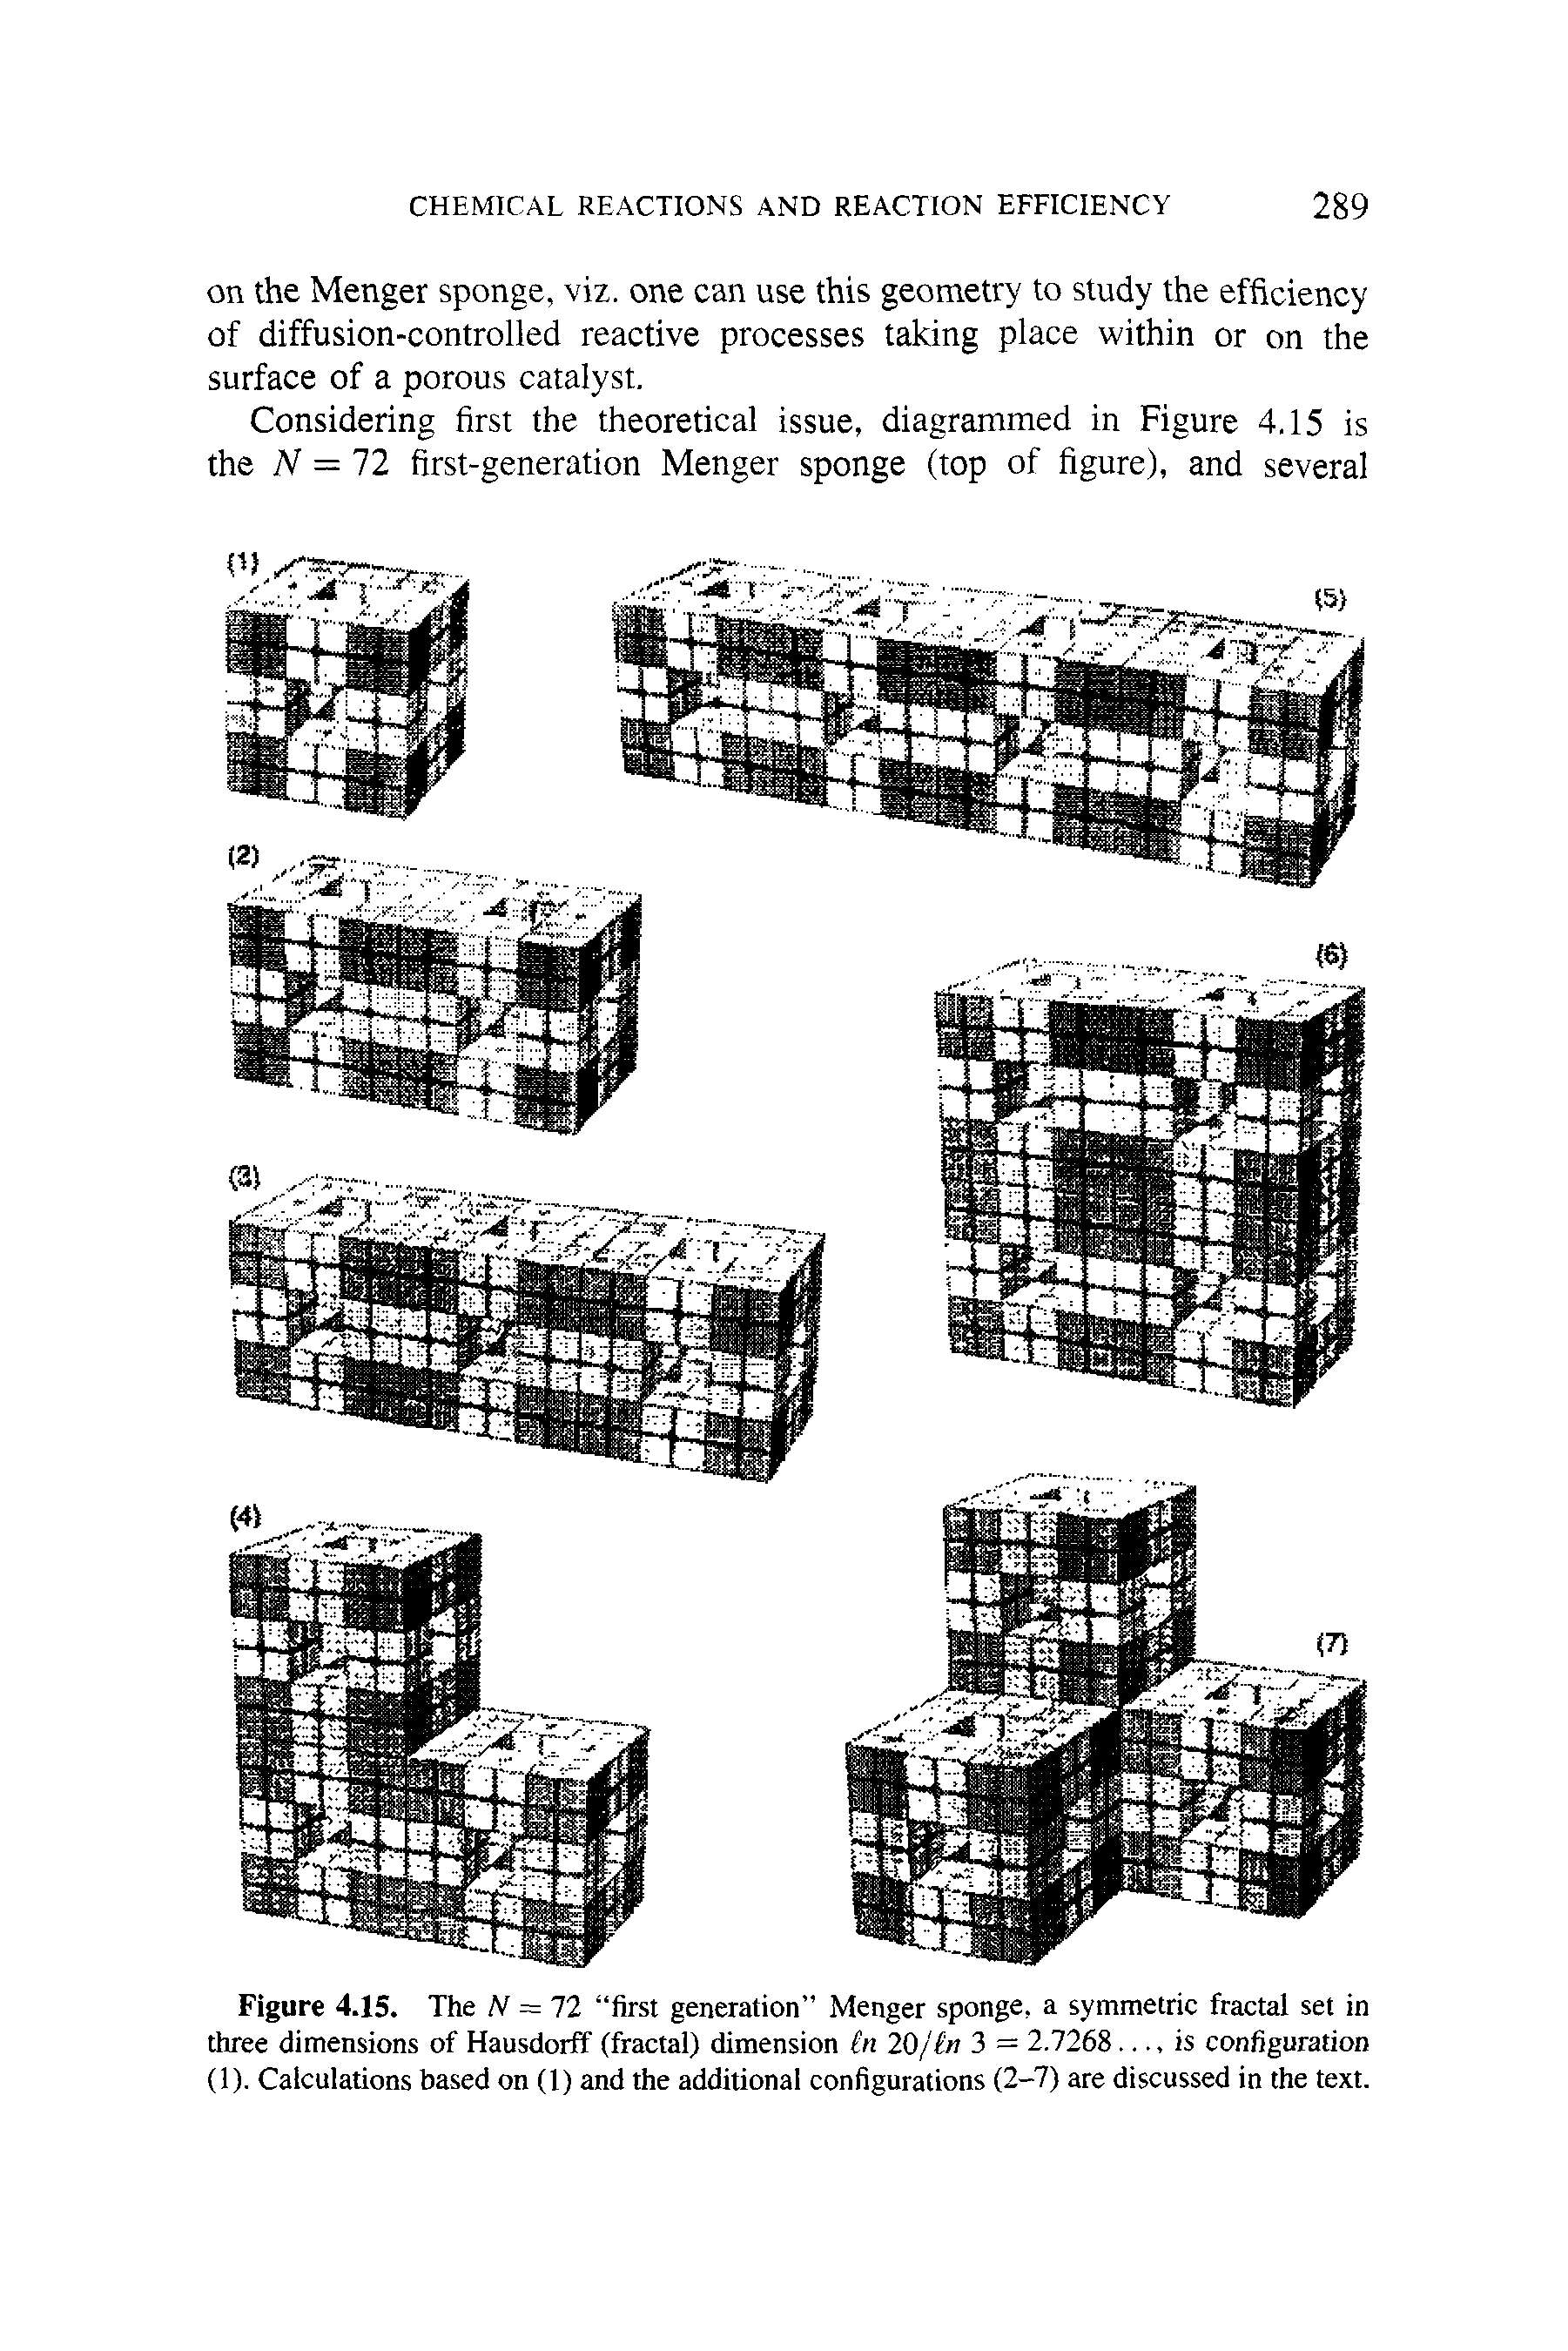 Figure 4.15. The N = 12 first generation Menger sponge, a symmetric fractal set in three dimensions of Hausdorff (fractal) dimension tn 20/fn 3 = 2.7268. is configuration (1). Calculations based on (1) and the additional configurations (2-7) are discussed in the text.